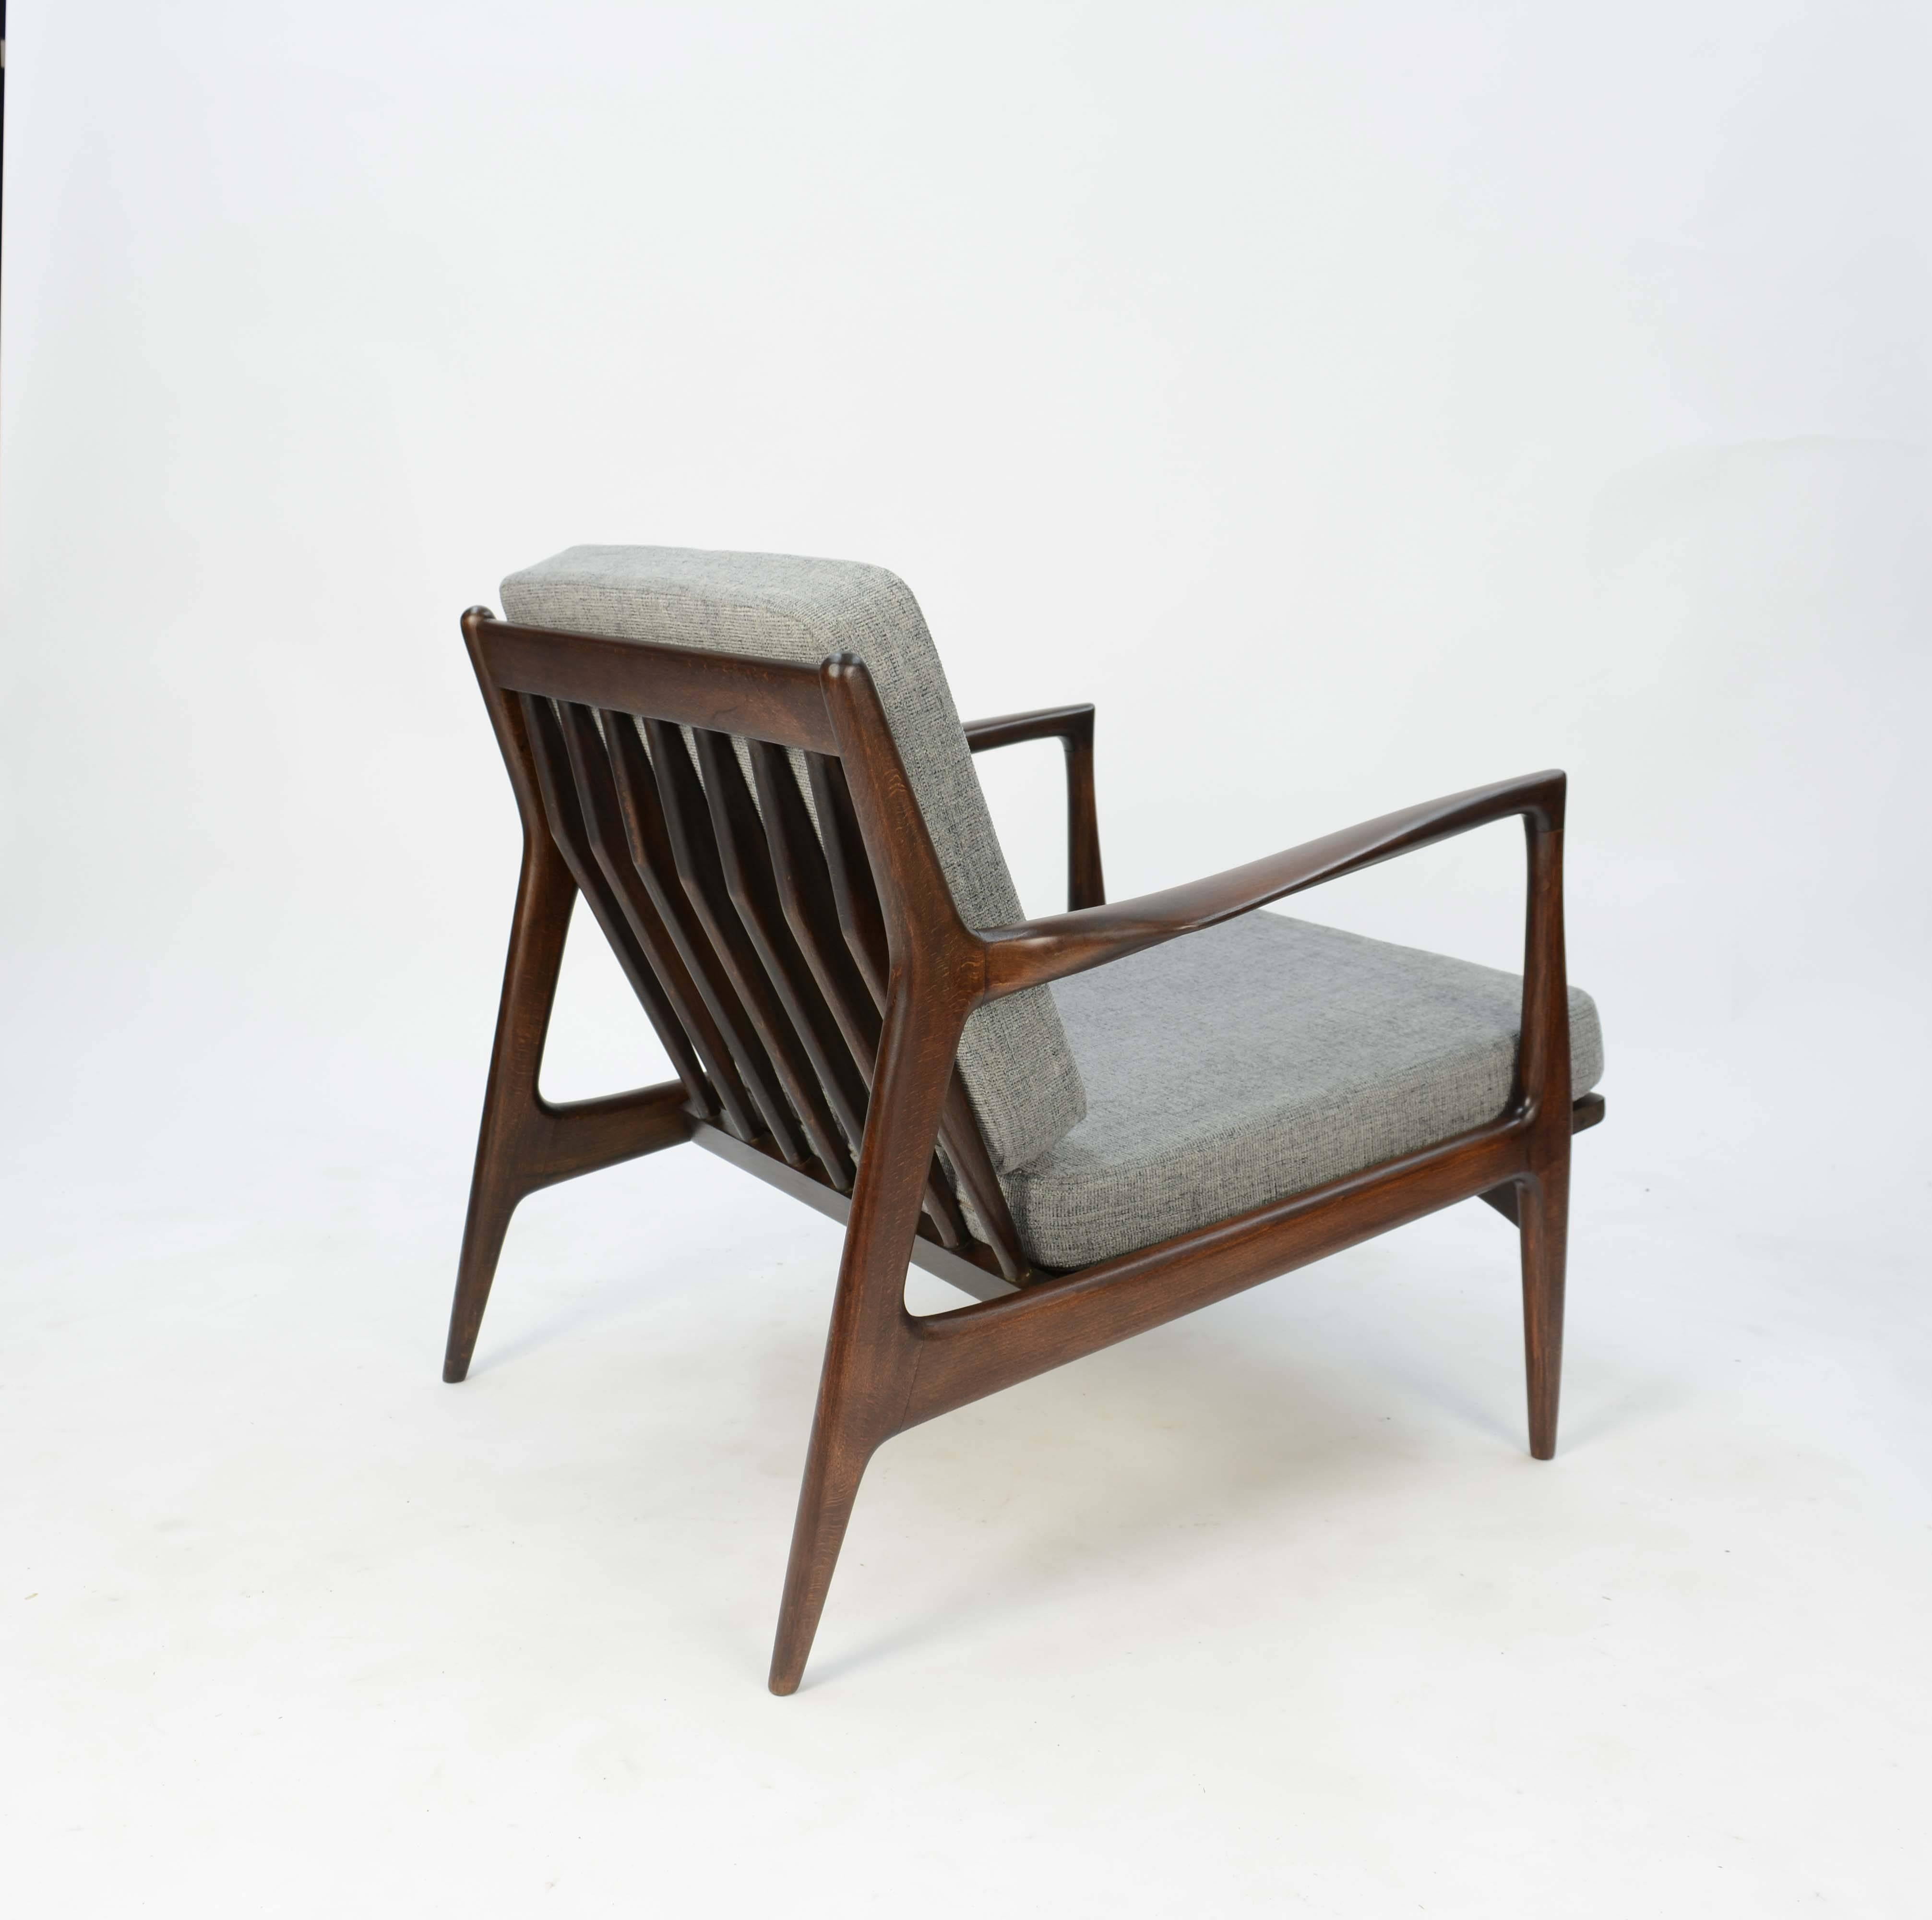 Mid-20th Century Ib Kofod- Larsen Club Chair and Ottoman for Selig of Denmark